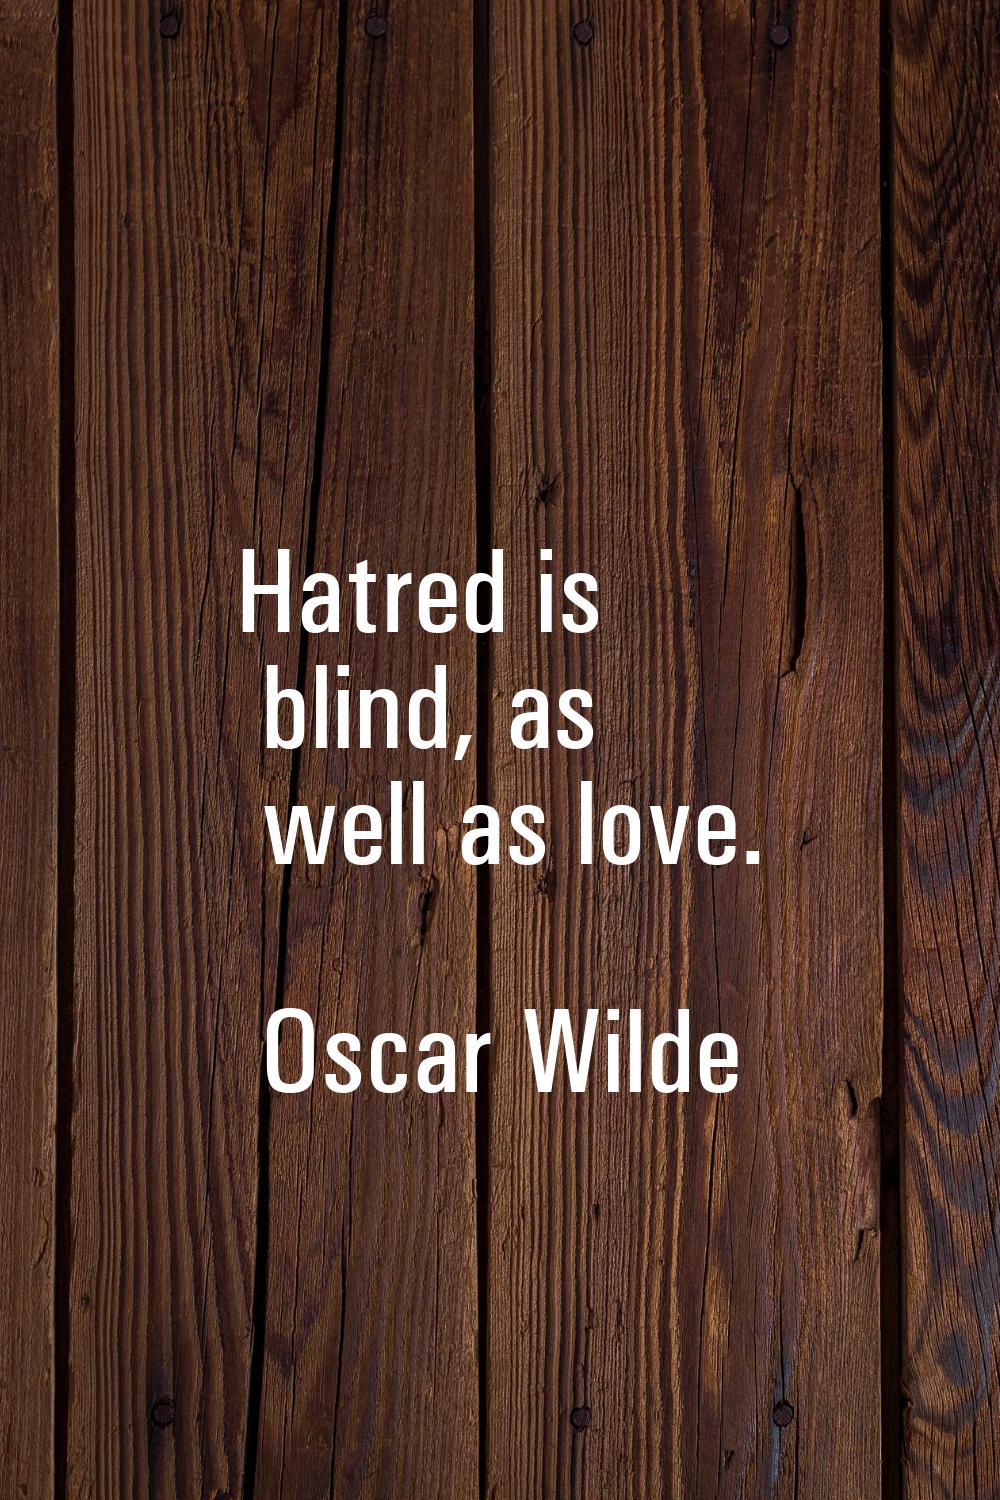 Hatred is blind, as well as love.